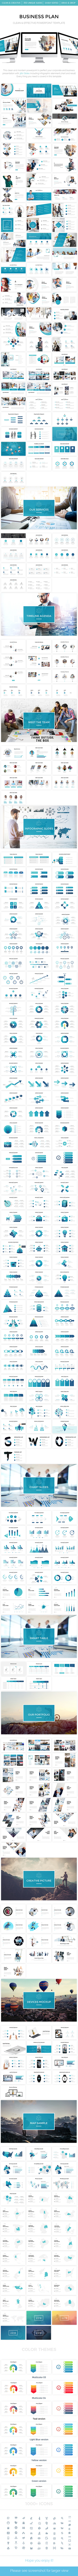 Clean - Effective Business Powerpoint Template 2018